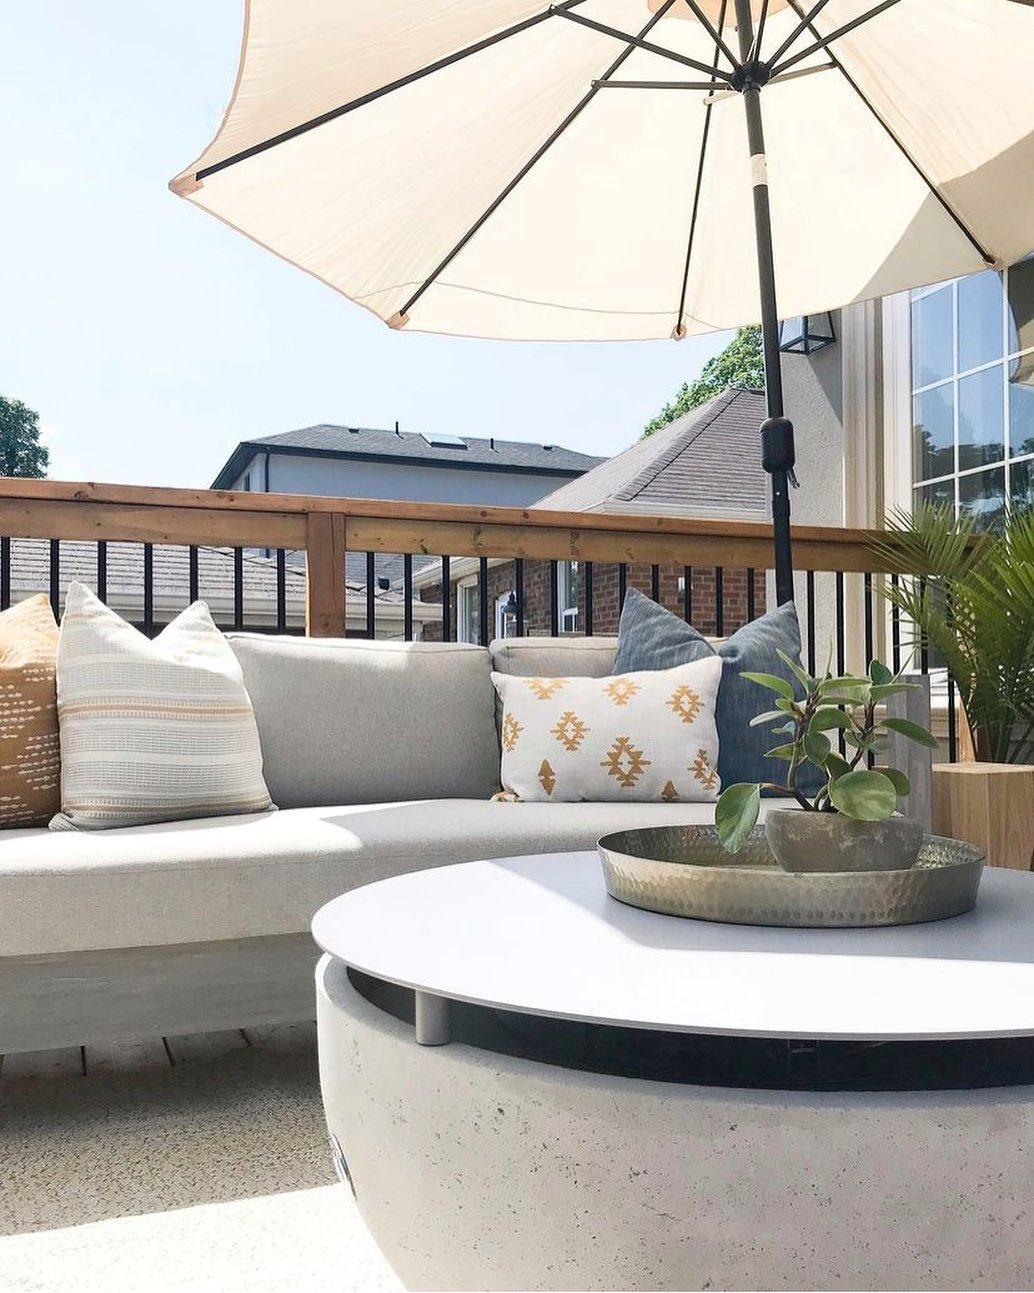 An outdoor space with a sofa, cushions, parasol and a Dekko Serenade firepit with added tabletop cover.